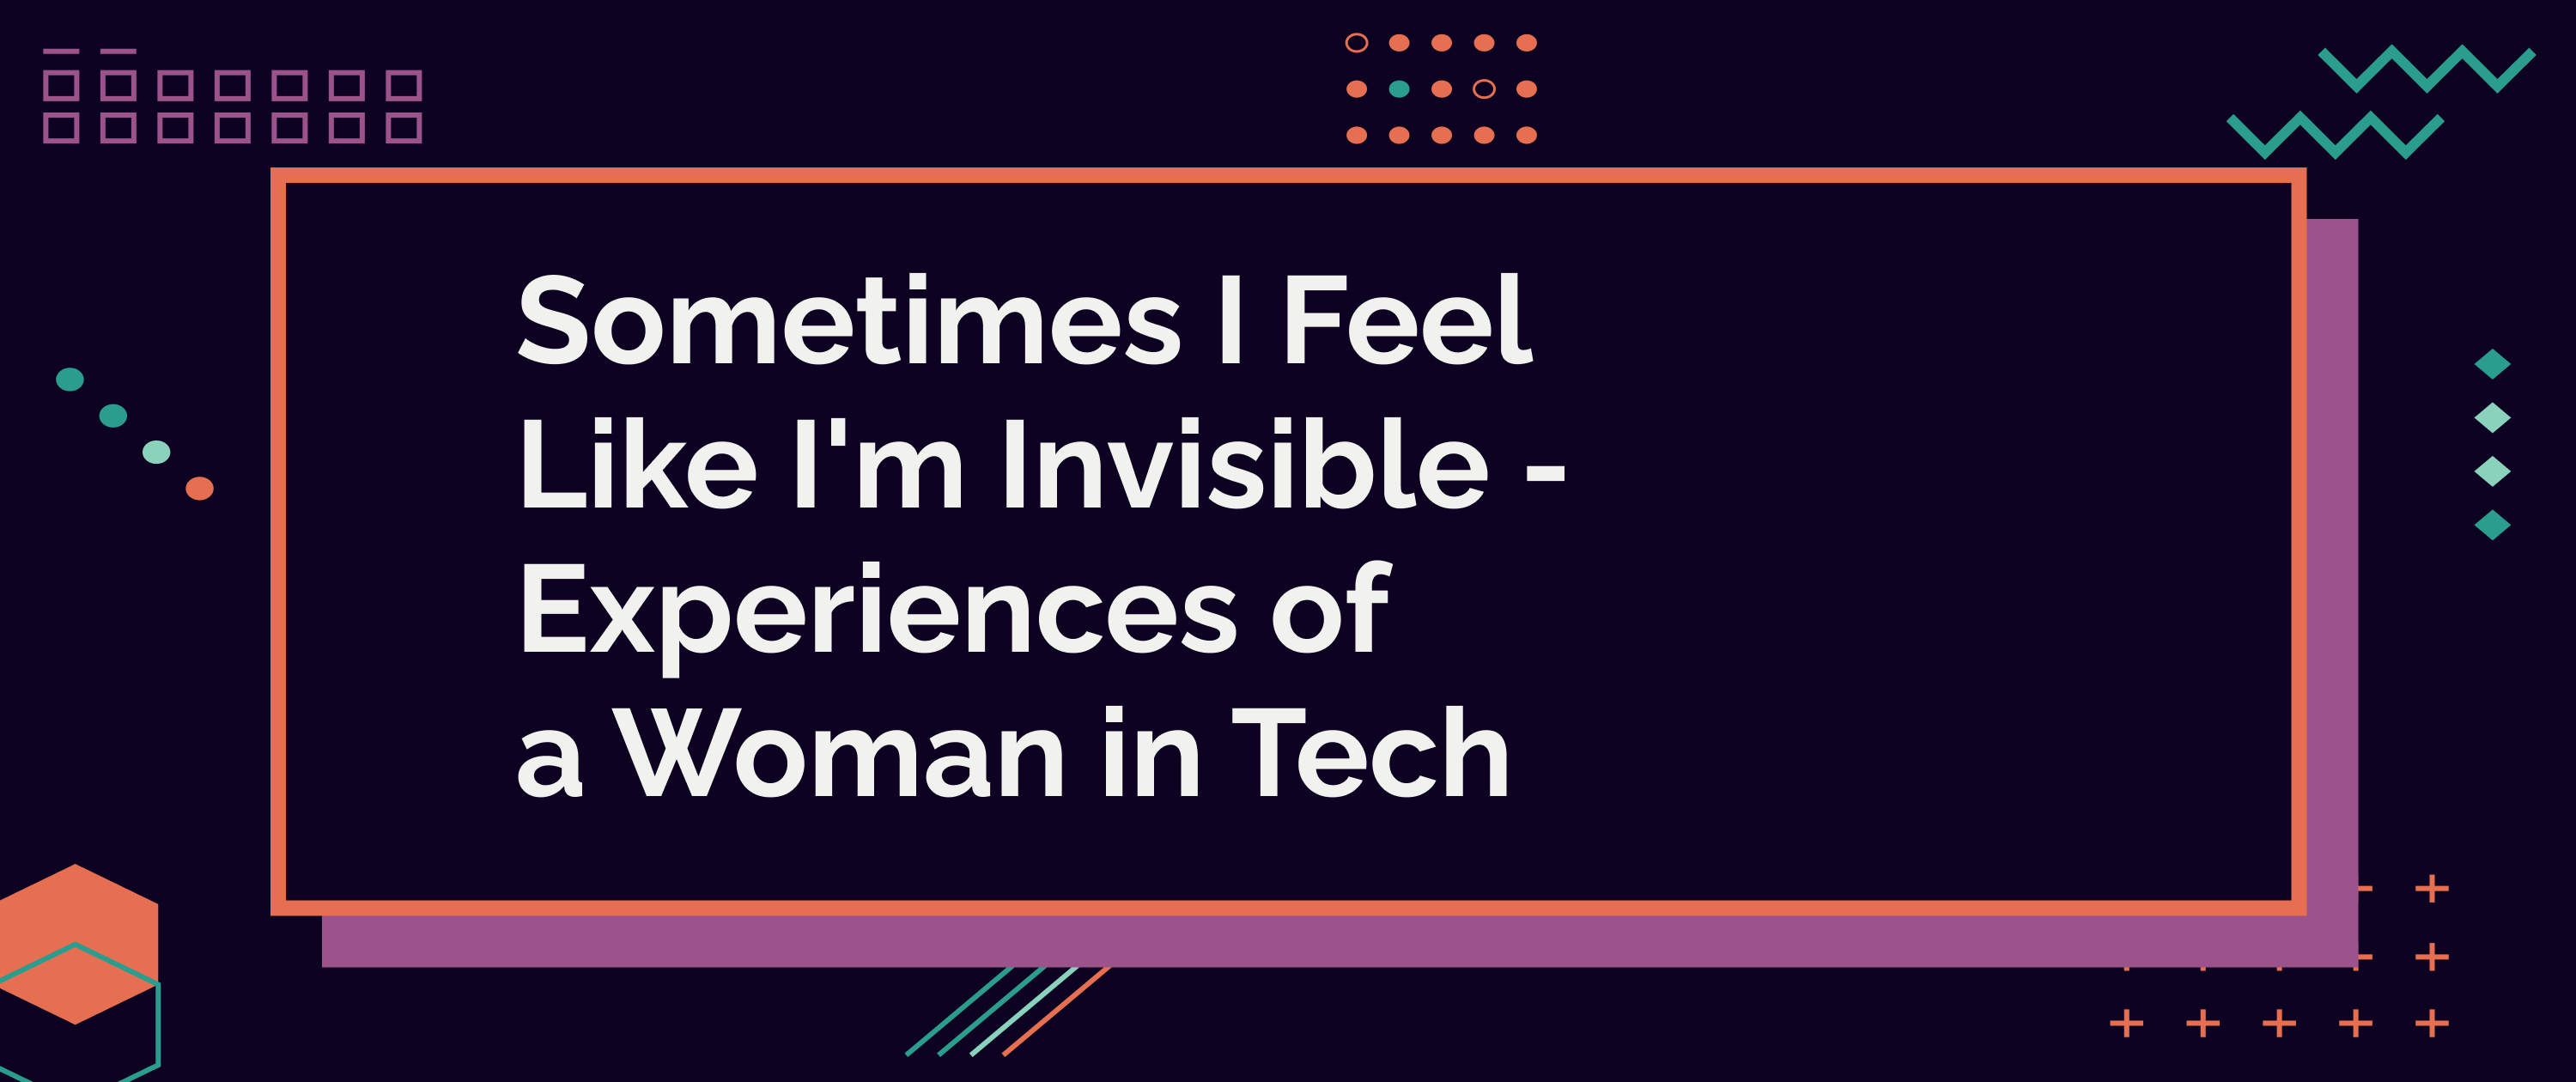 Sometimes I feel like I'm invisible - experiences of a woman in tech.